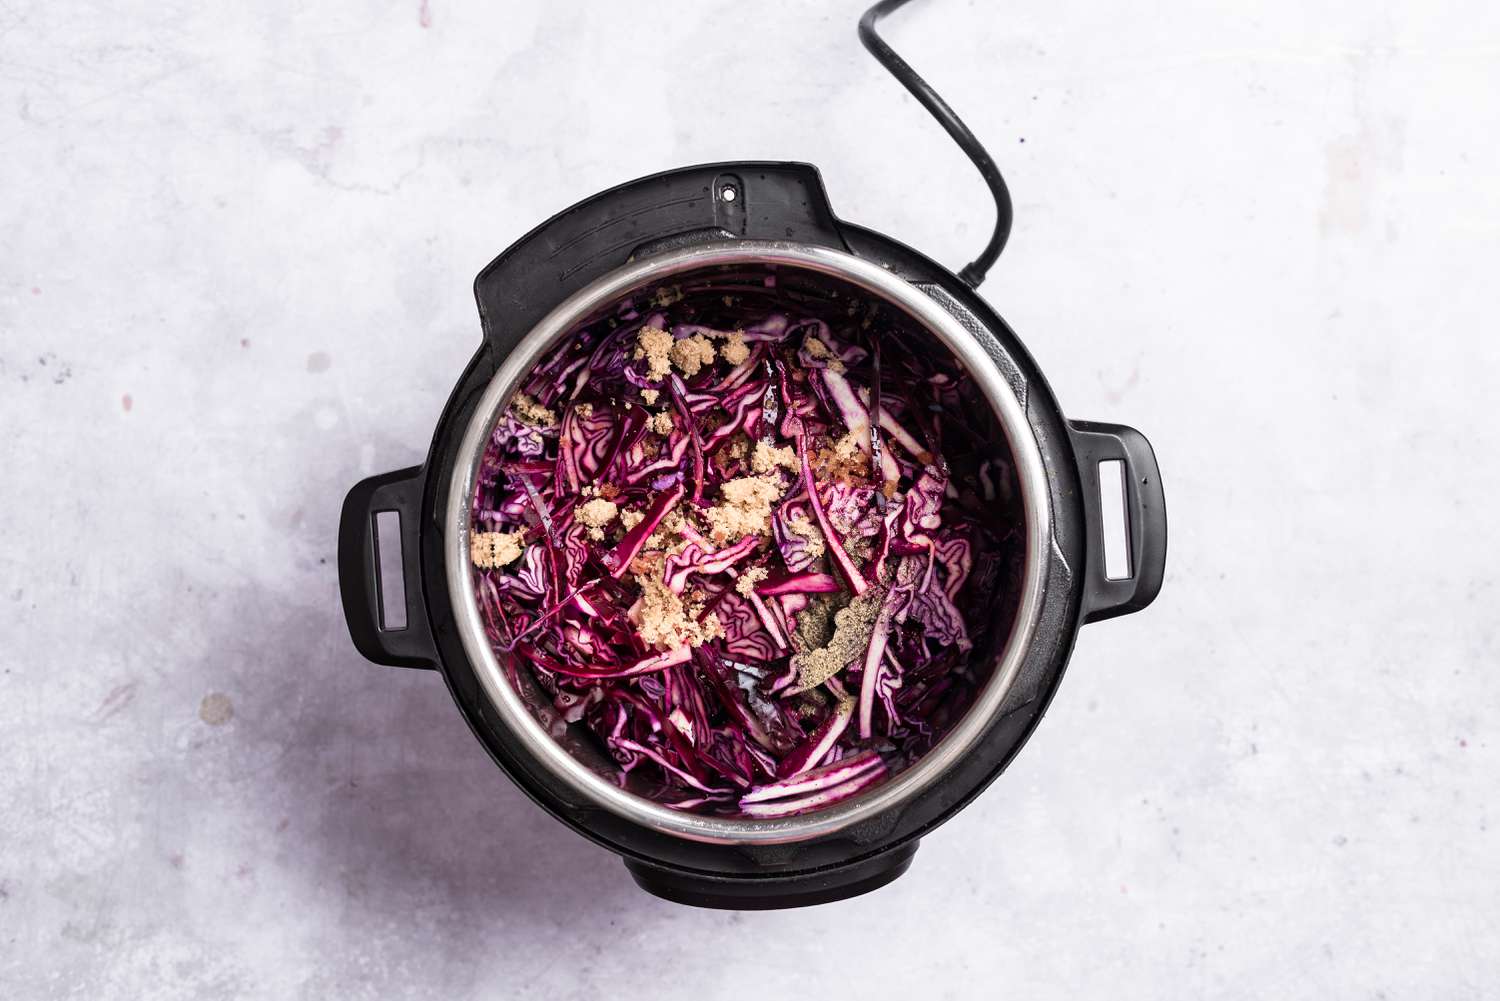 Cabbage, vinegar, brown sugar, salt, and pepper added to the onion mixture in an Instant Pot